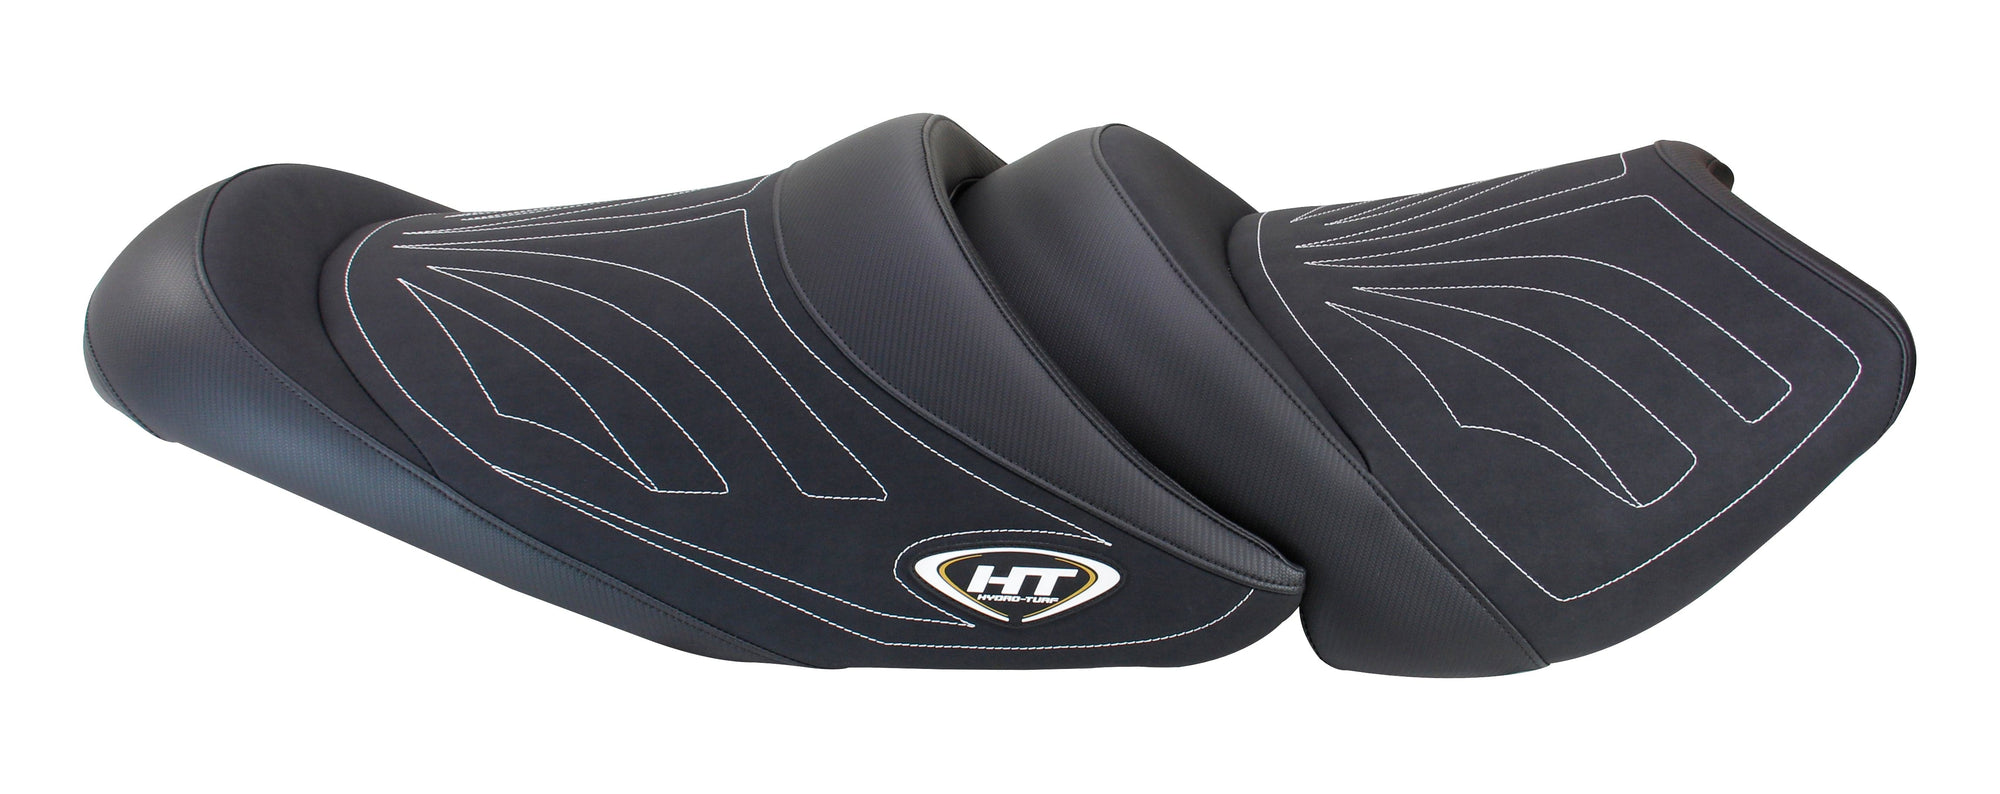 Hydro-Turf Premier Seat Cover for Kawasaki STX 160LX (20) Colorway A